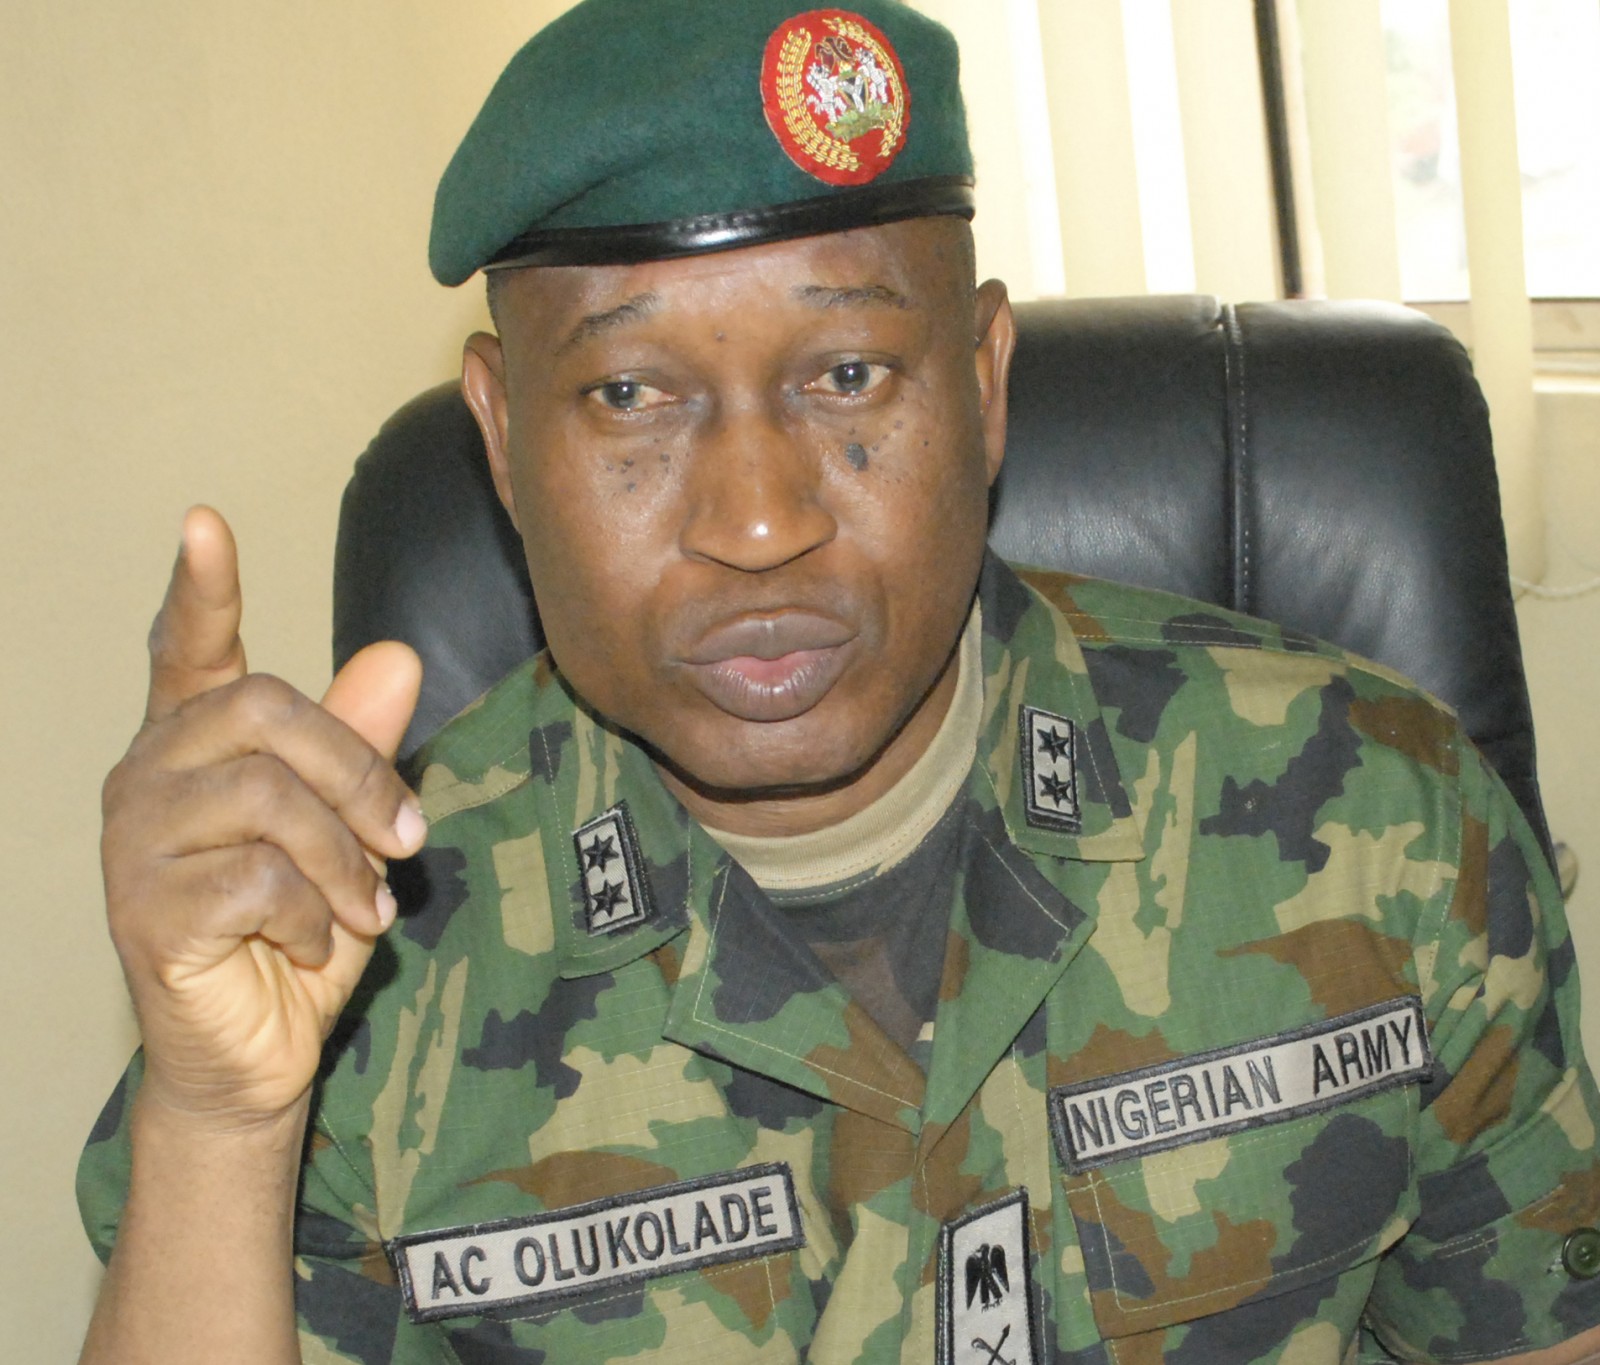 Boko Haram Nigerian Army The spokesman of the Nigeria Defence Headquarters, Maj. Gen. Chris Olukolade, on Tuesday, June 30, 2015 launched two books at the Nigeria Air Force Conference Centre.